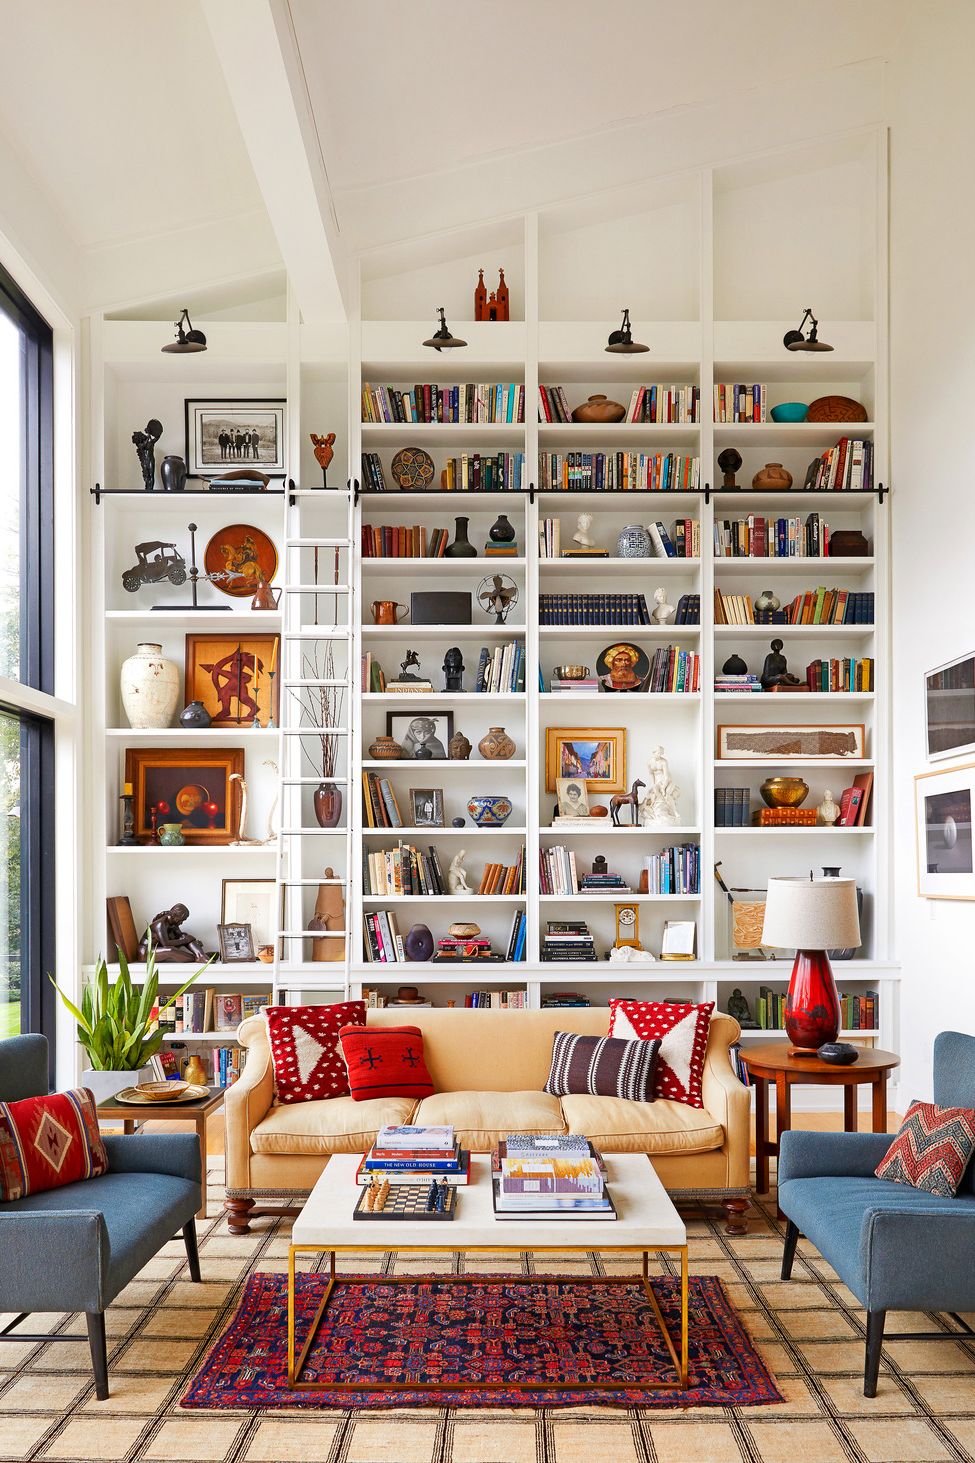 Living room with high built-in shelves, built-ins, bookcases, white walls, ladder, storage, library